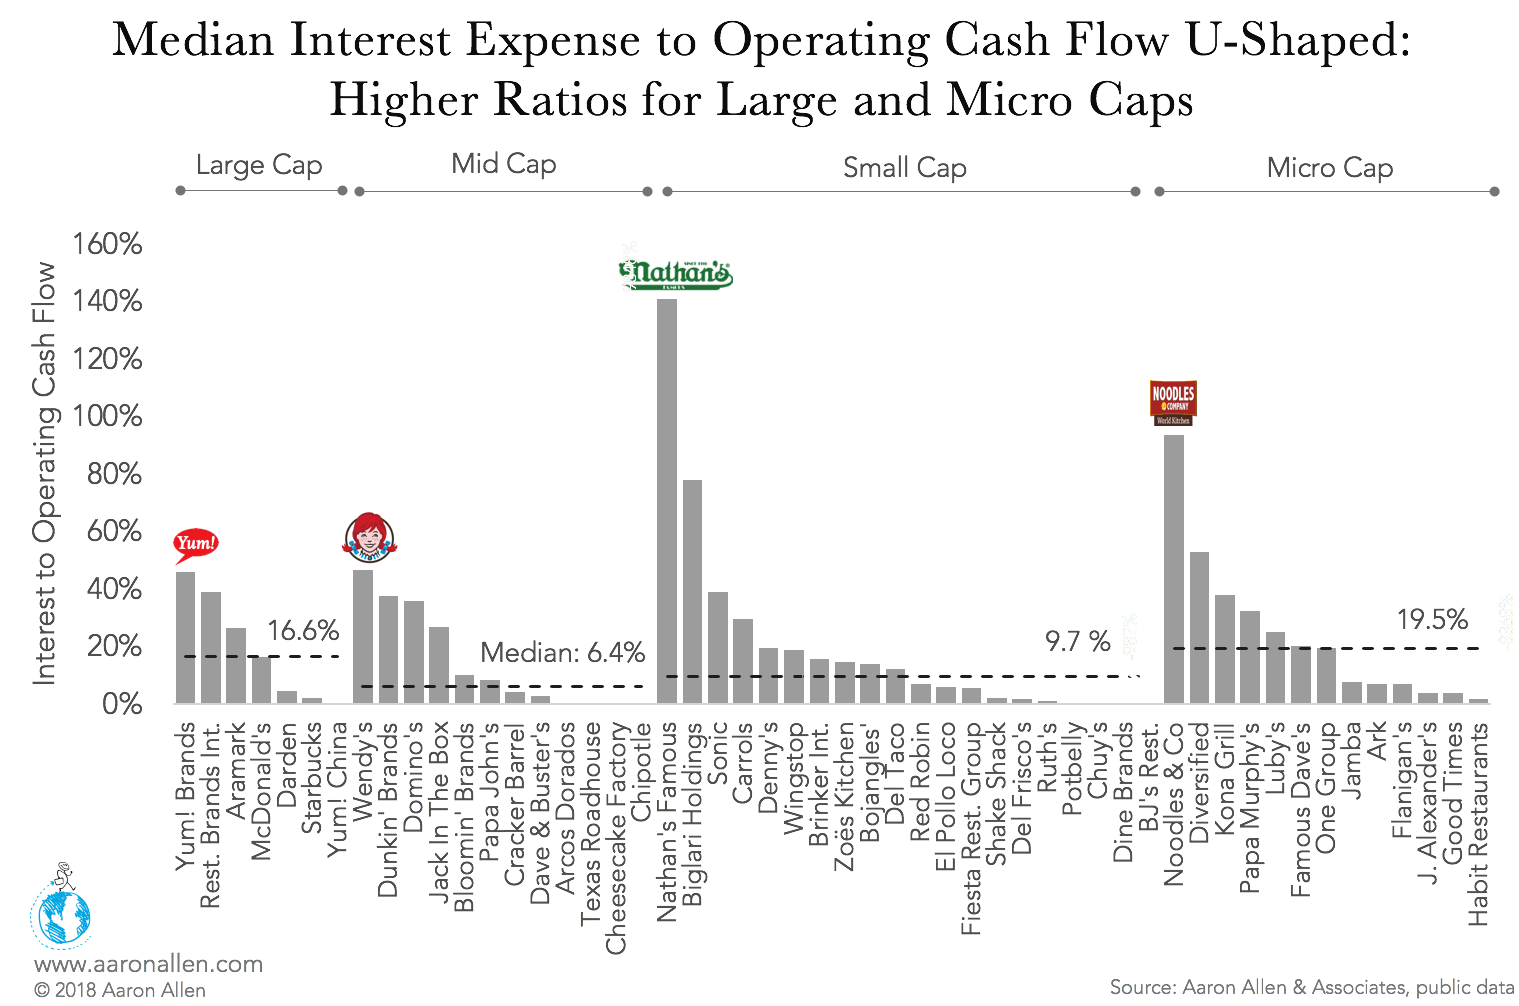 Median Interest Expense to Operating Cash Flow U-Shaped: Higher Ratios for Large and Micro Caps 